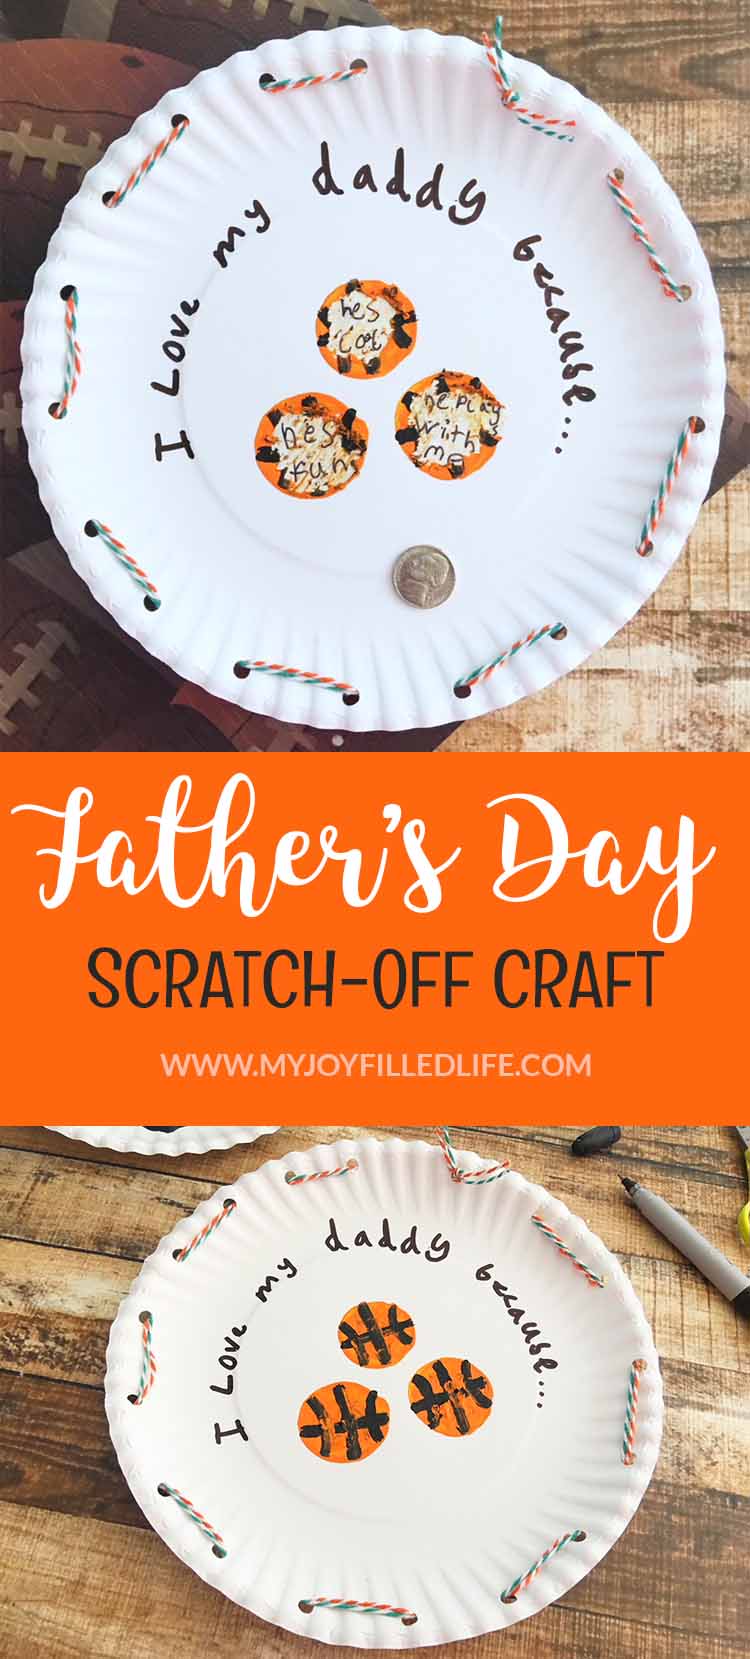 This Father's Day craft is the perfect activity for kids just in time for Father's Day! He will love uncovering the reasons why he's loved so much this Father's Day! Kids will love helping with this fun scratch-off craft that they can give to Dad! #kidcraft #fathersday